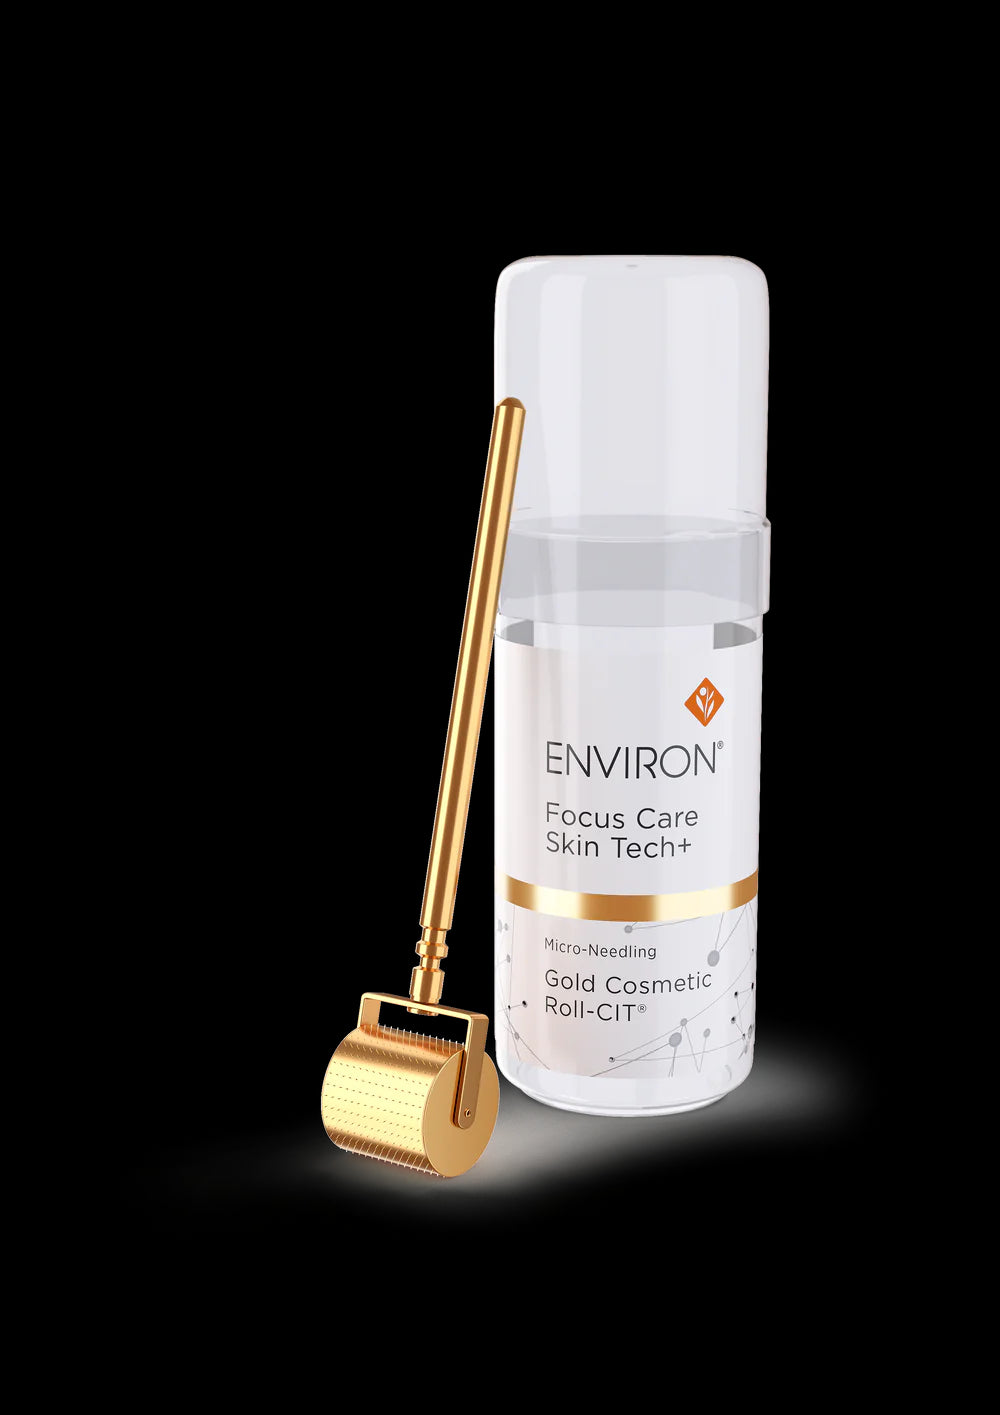 Environ Focus Care Skin Tech+ Micro-Needling Gold Cosmetic Roll CIT